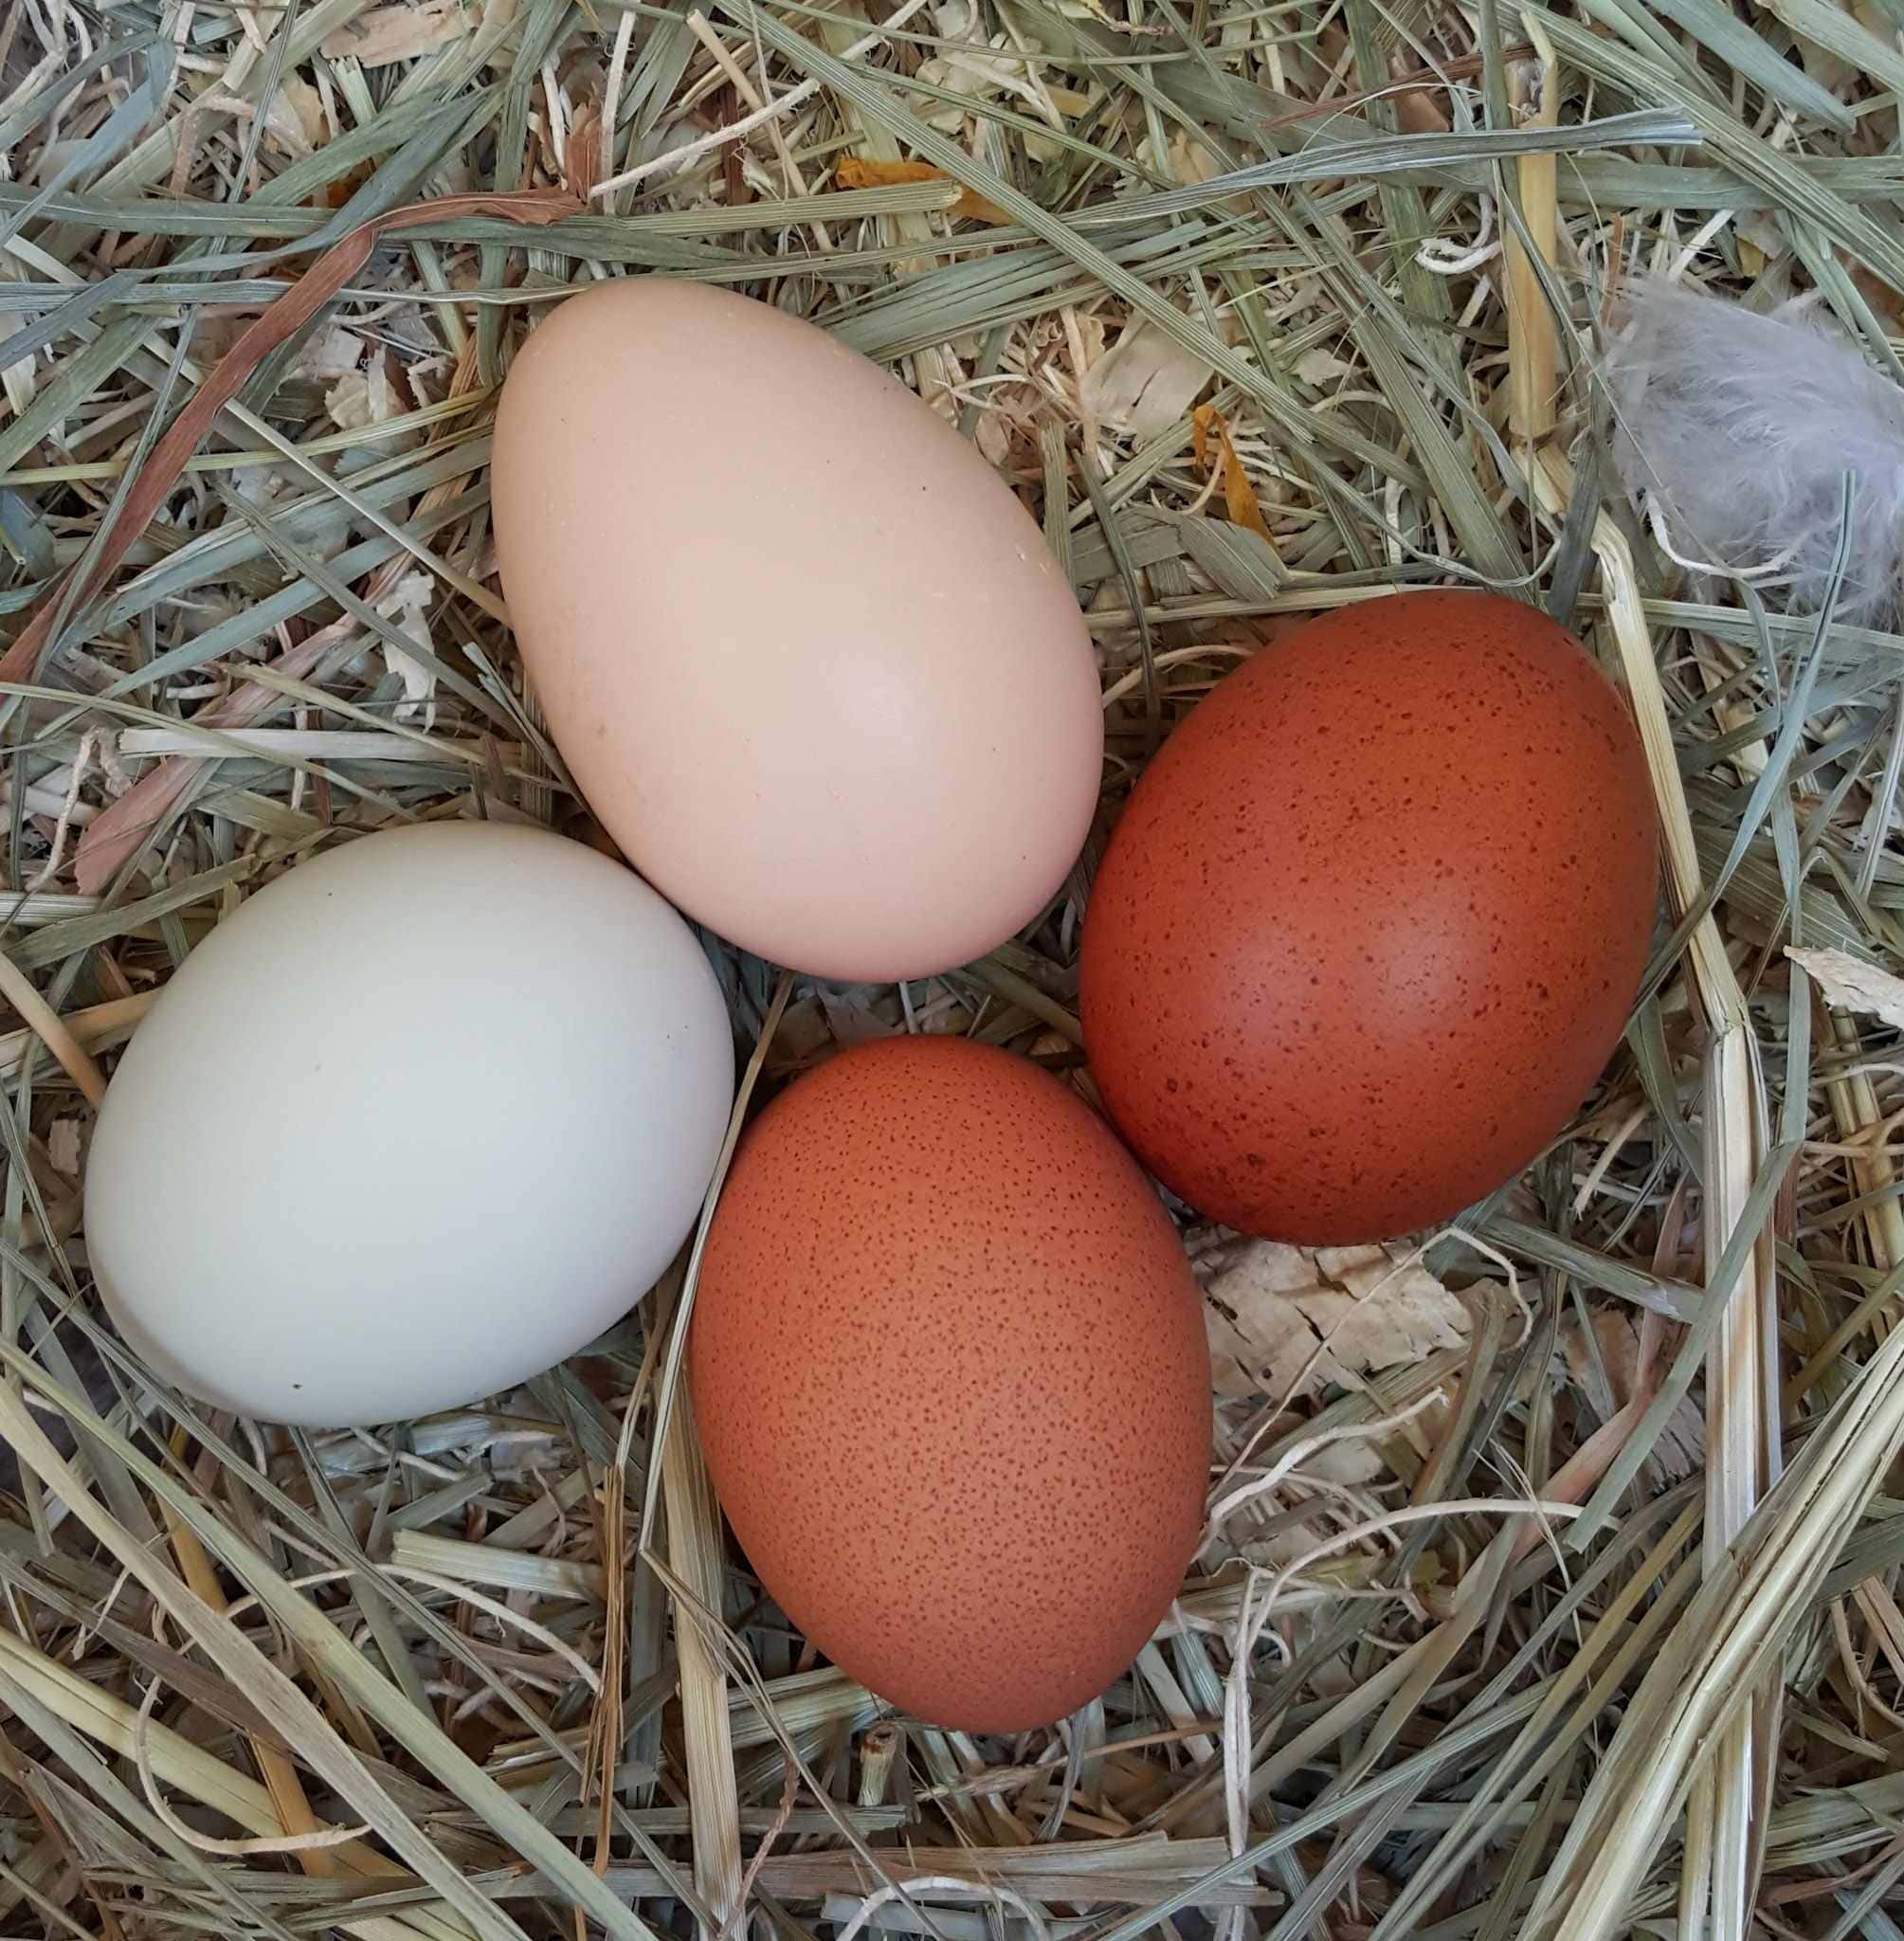 Four eggs sit in a chickens nest box. They are on top of a bed of hay and straw, on egg is blue, one is light brown, and two are dark brown with dark speckles. There is a fluffy chicken feather barley entering the image from the right most edge. 